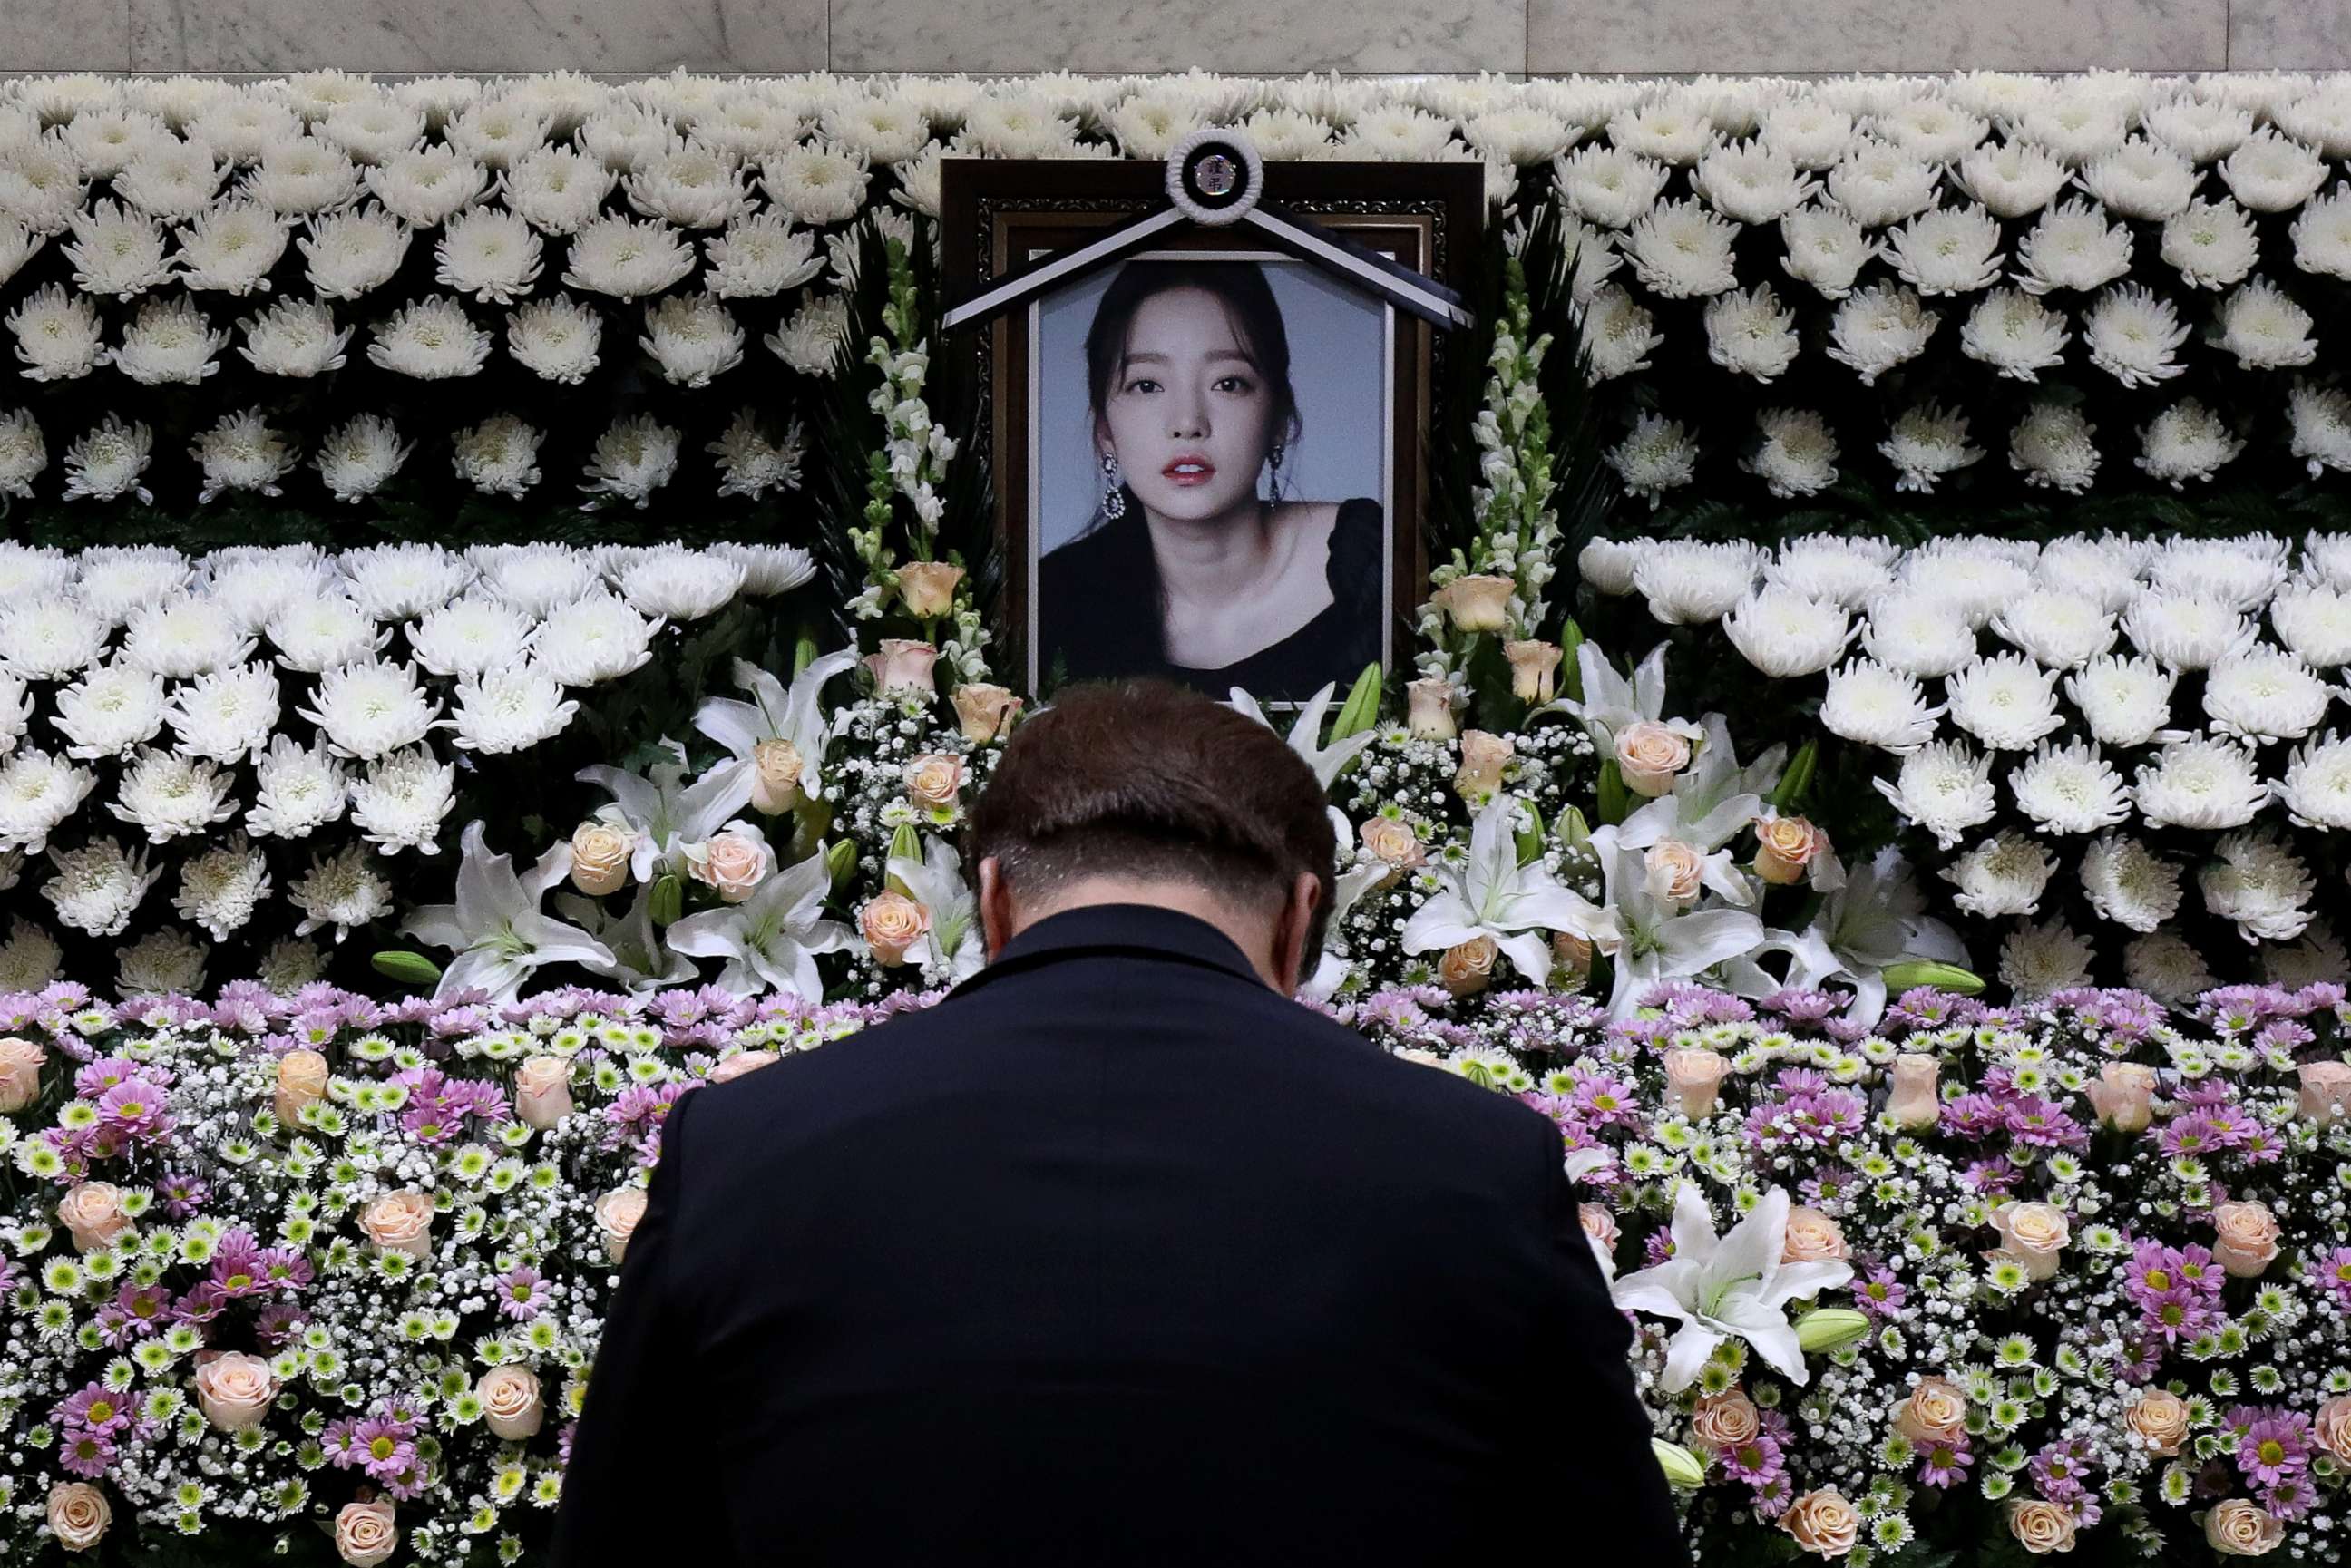 PHOTO: A man pays tribute at a memorial altar in honor of K-pop star Goo Hara at Seoul St. Mary's Hospital Nov. 25, 2019, in Seoul, South Korea.